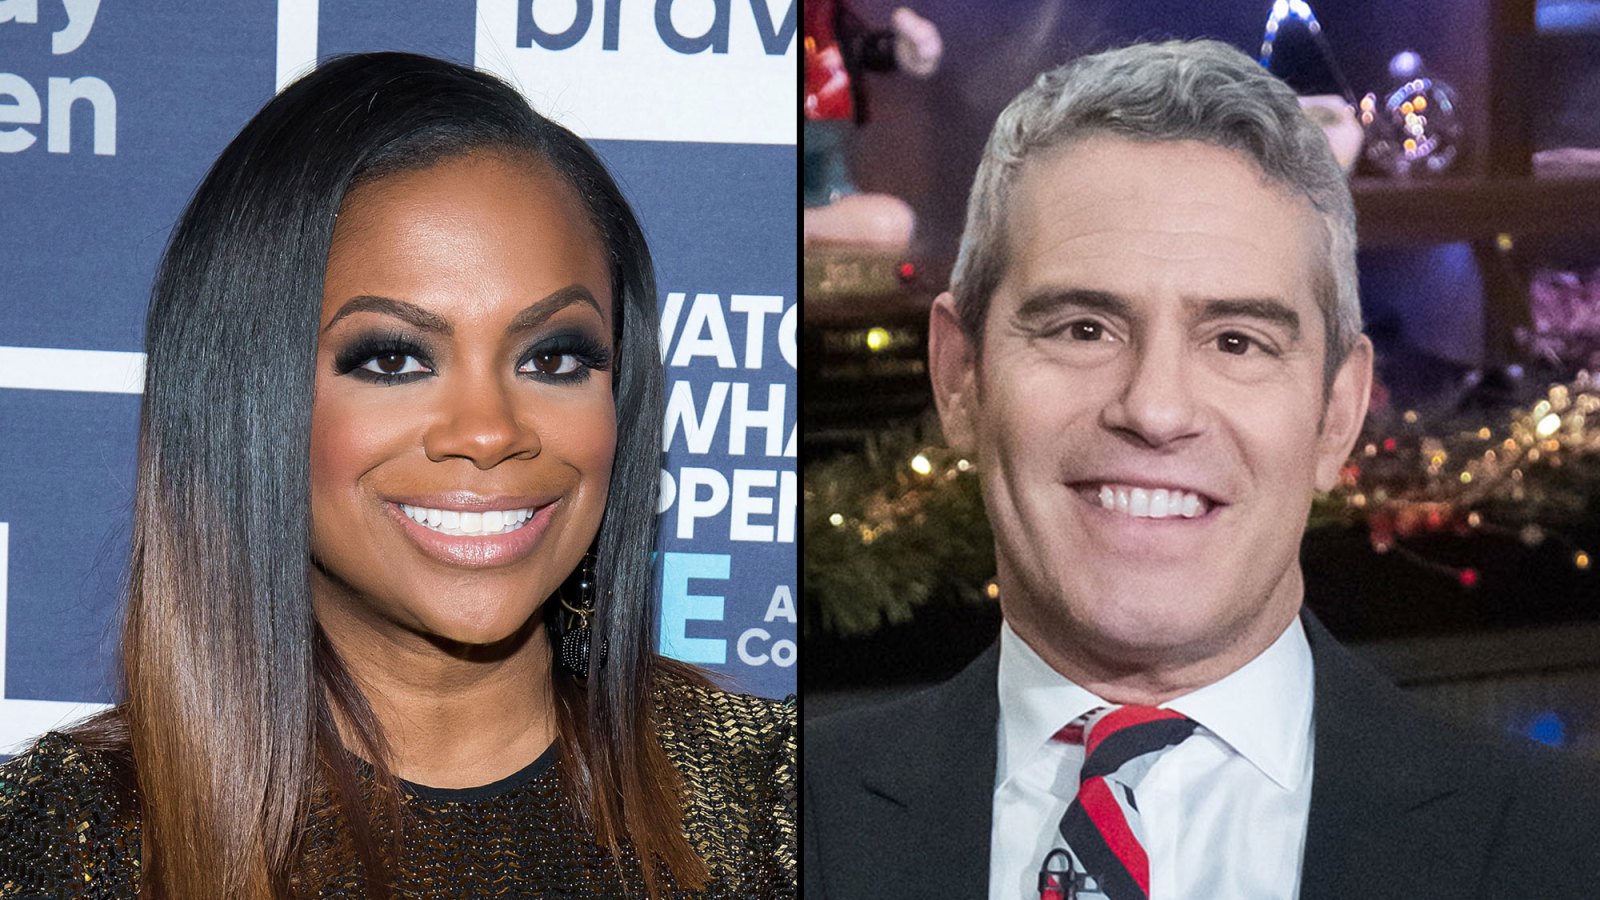 Kandi Burruss Tears Up Talking About Andy Cohen’s Surrogacy Advice: He ‘Made Me Feel Better’